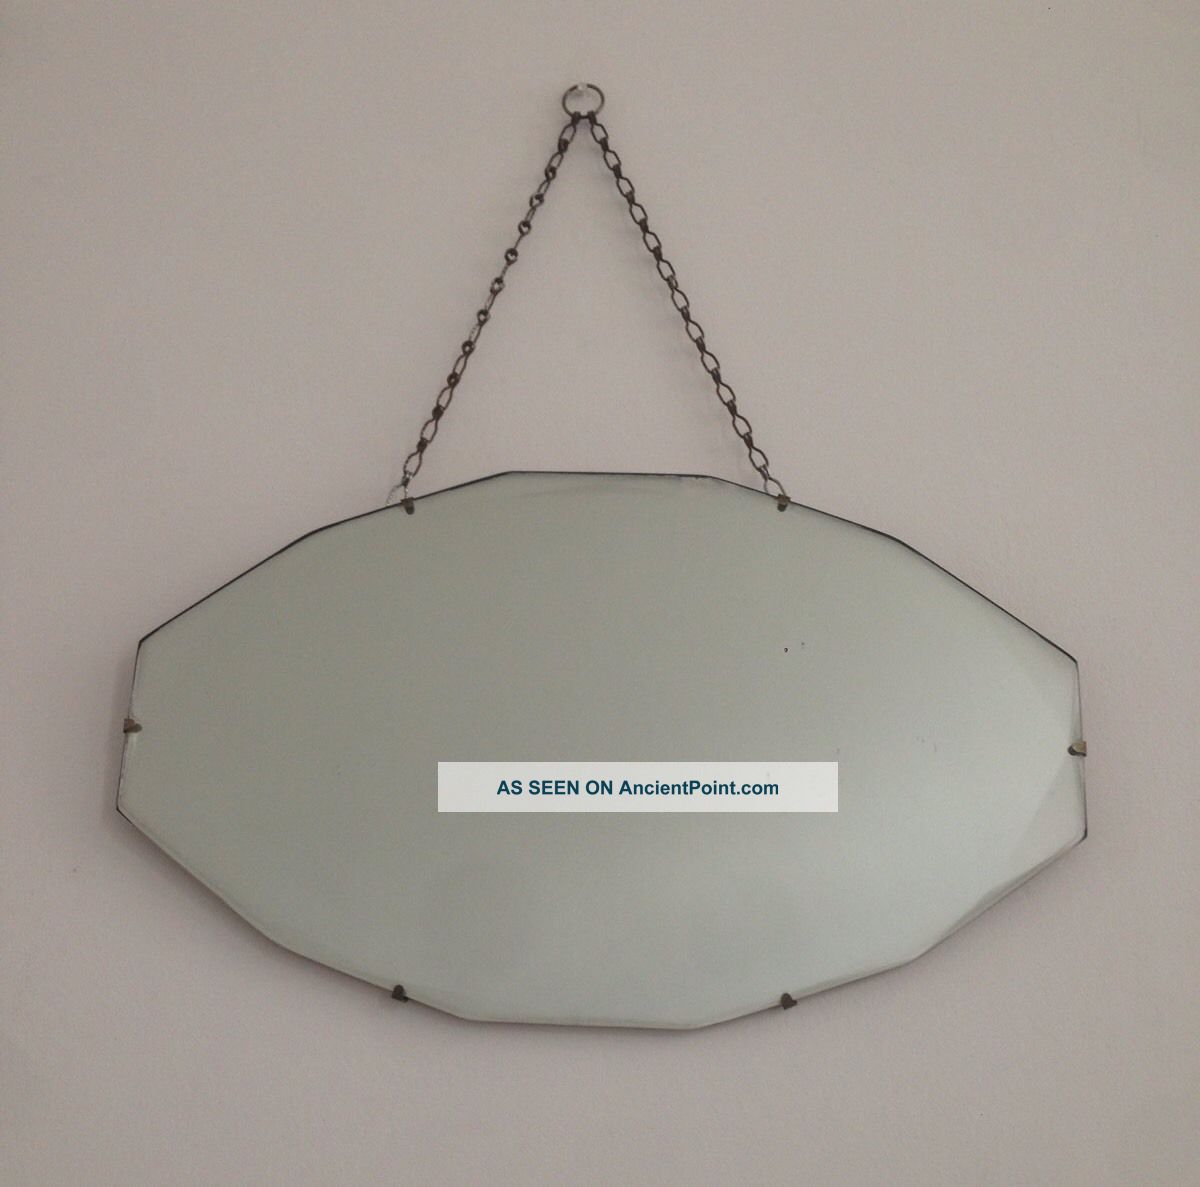 Vintage Art Deco Iconic Frameless Beveled Edge Hanging Wall Mirror With Chain 20th Century photo